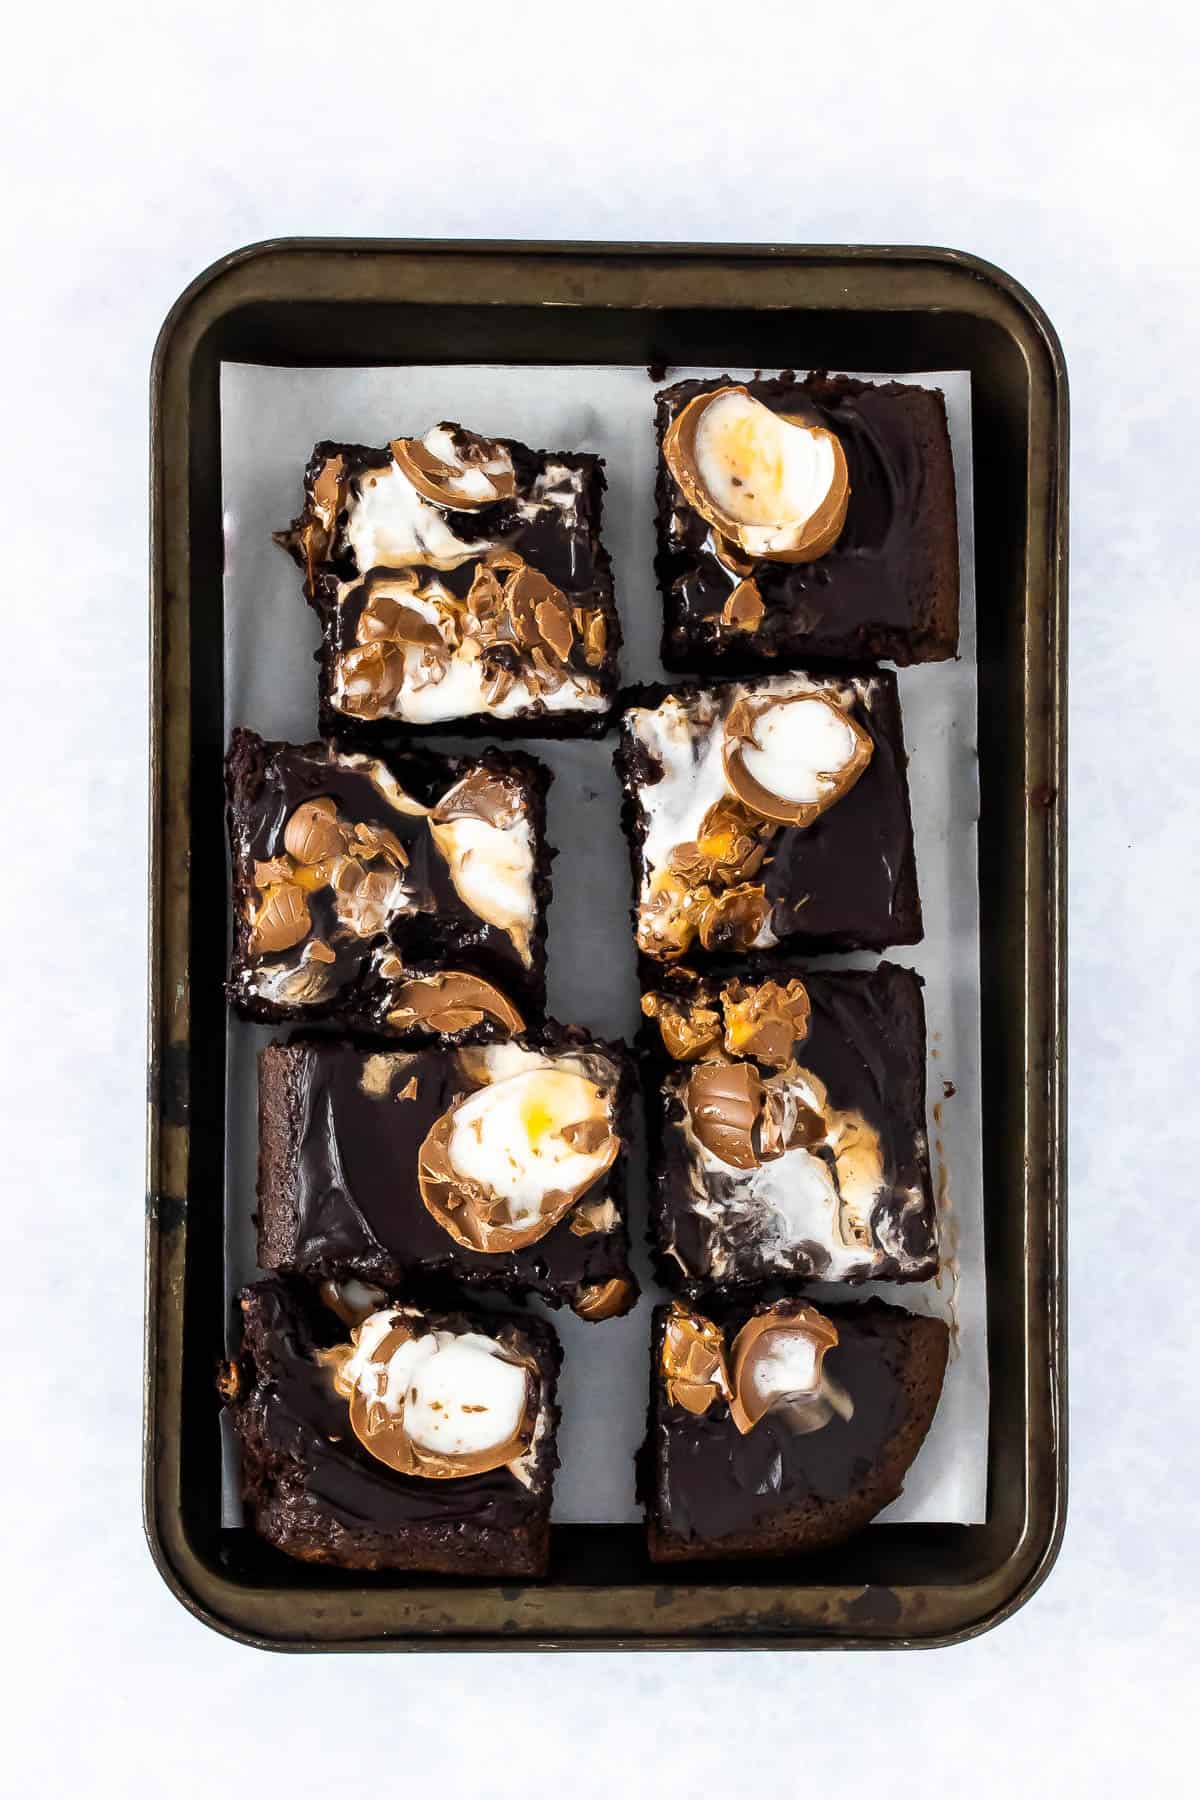 Bake up a gooey chocolate delight for Easter with this Creme Egg traybake. Moist and rich chocolate cake, coated in a chocolate icing and smashed Creme Eggs on top.